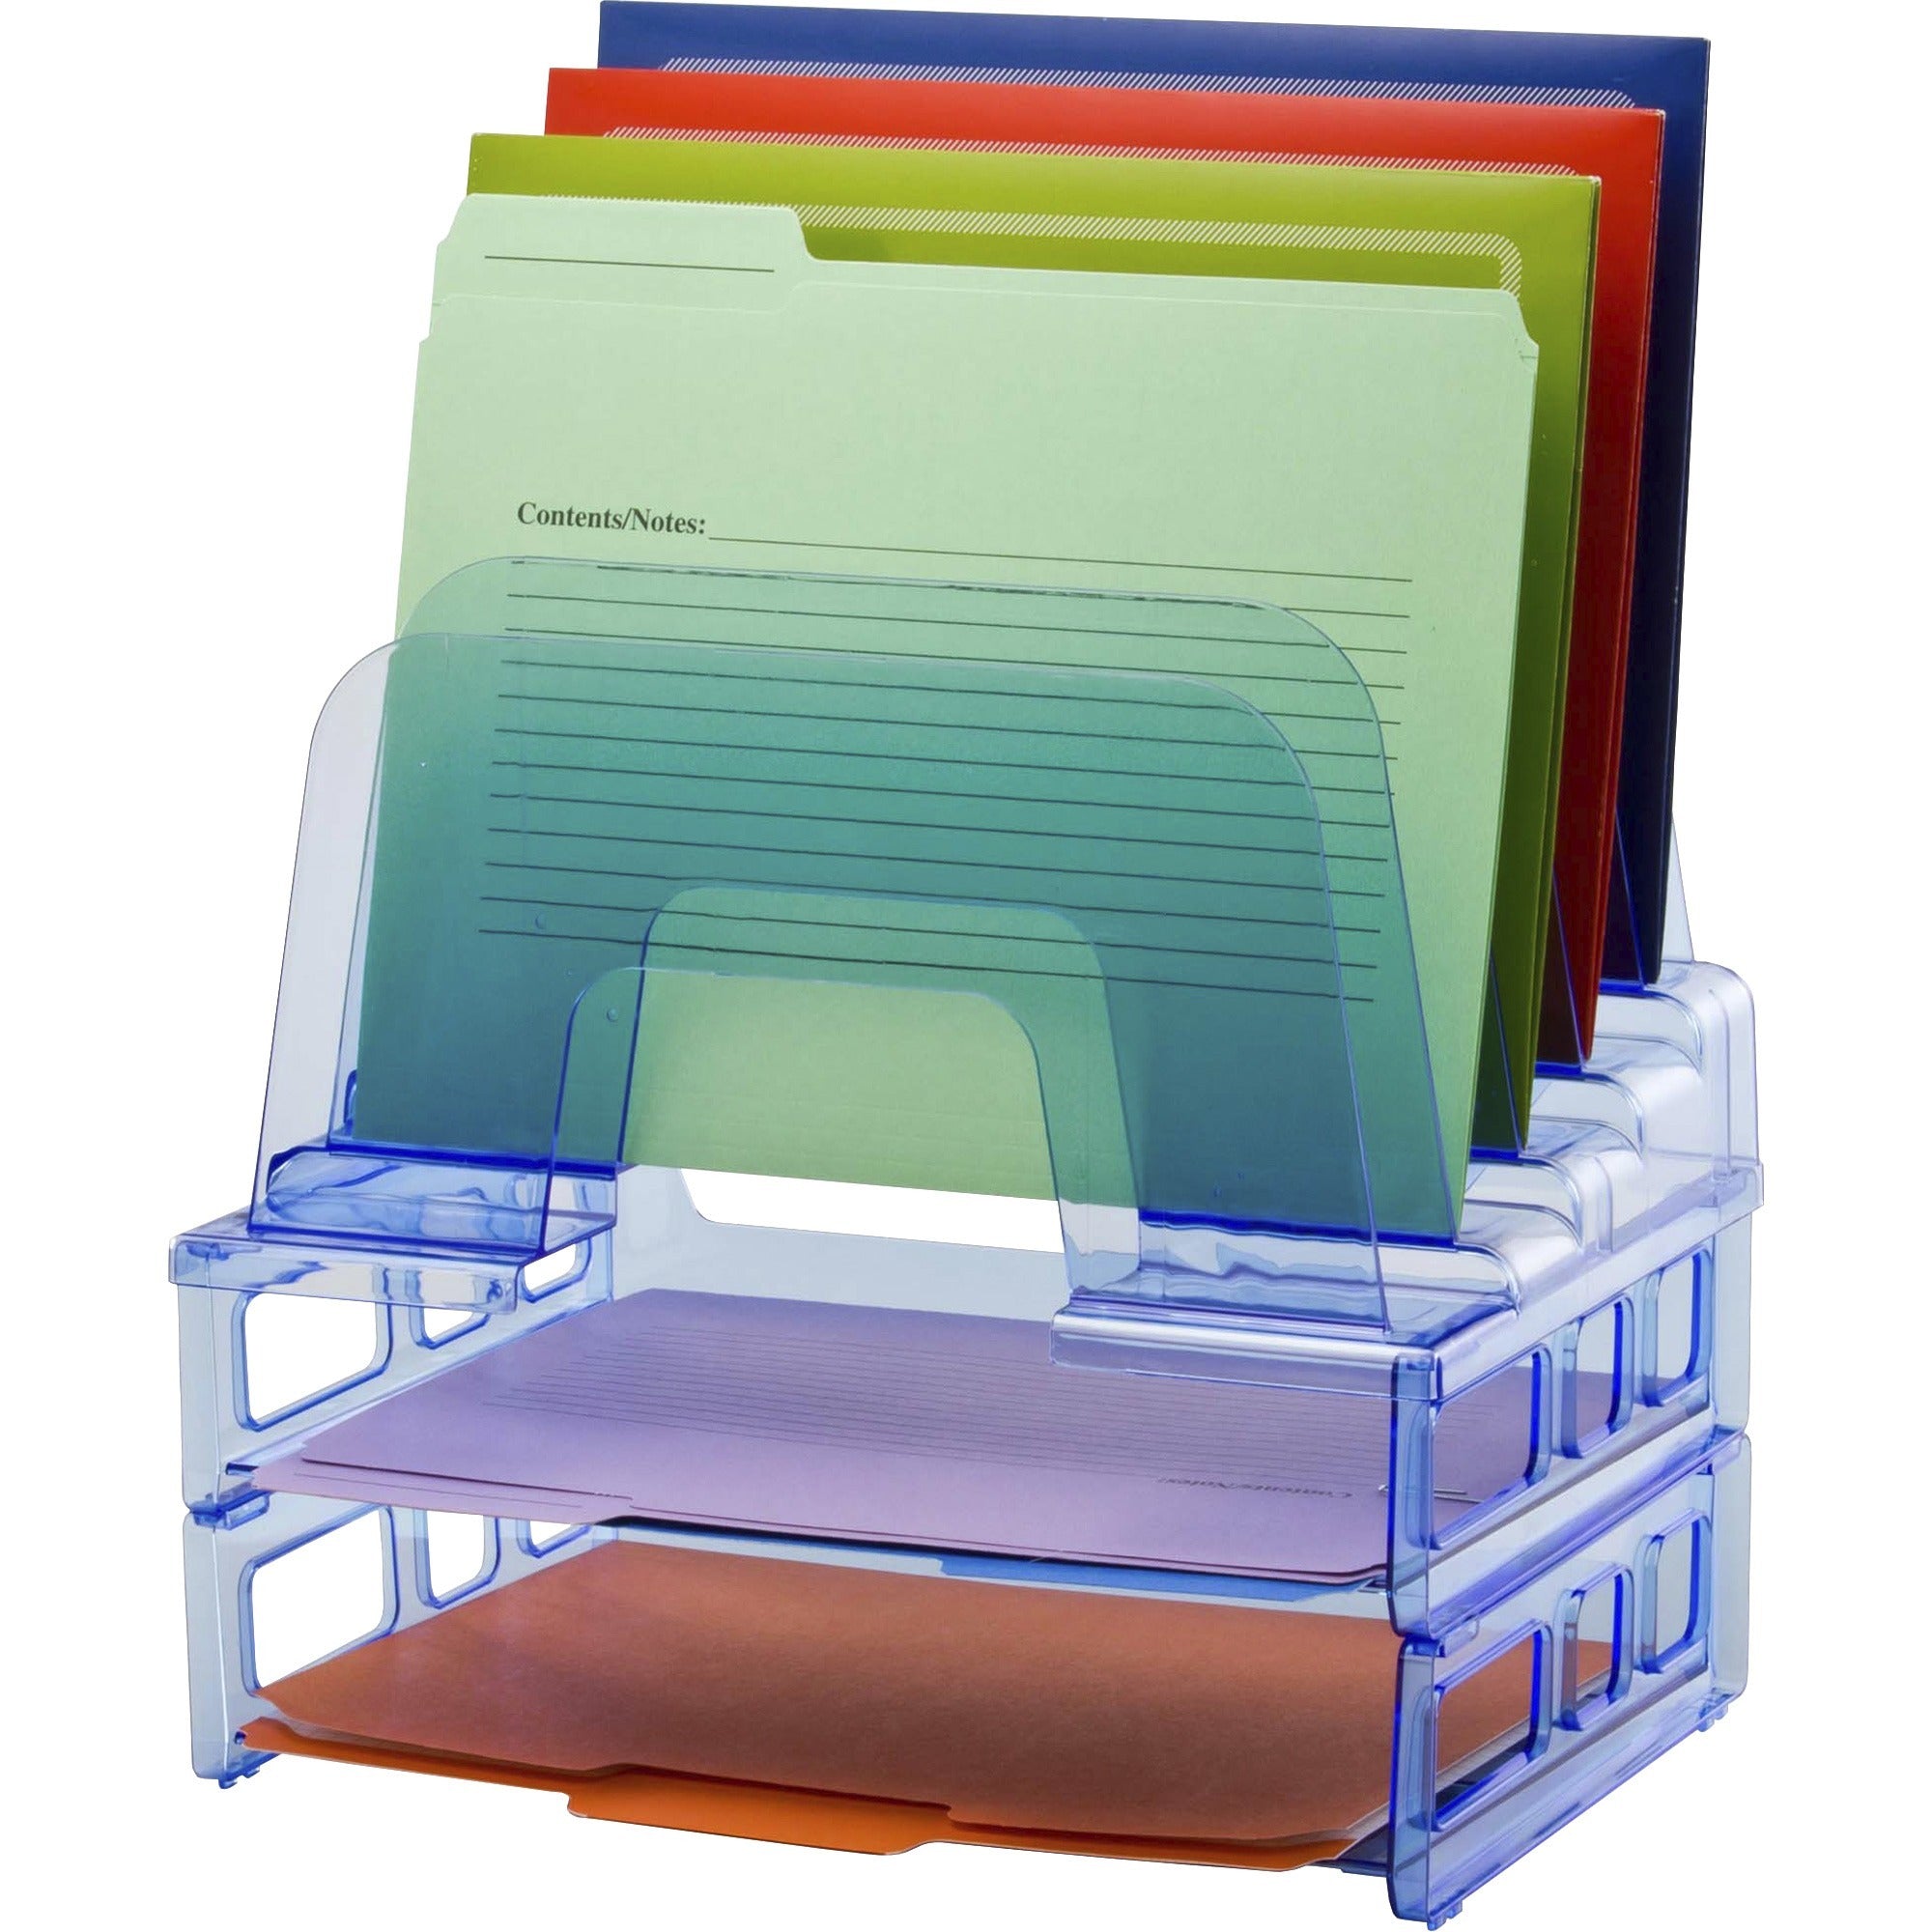 officemate-blue-glacier-large-incline-sorter-w-2-letter-trays-5-compartments-143-height-x-134-width-x-9-depth-compact-transparent-blue-1-each_oic23211 - 1